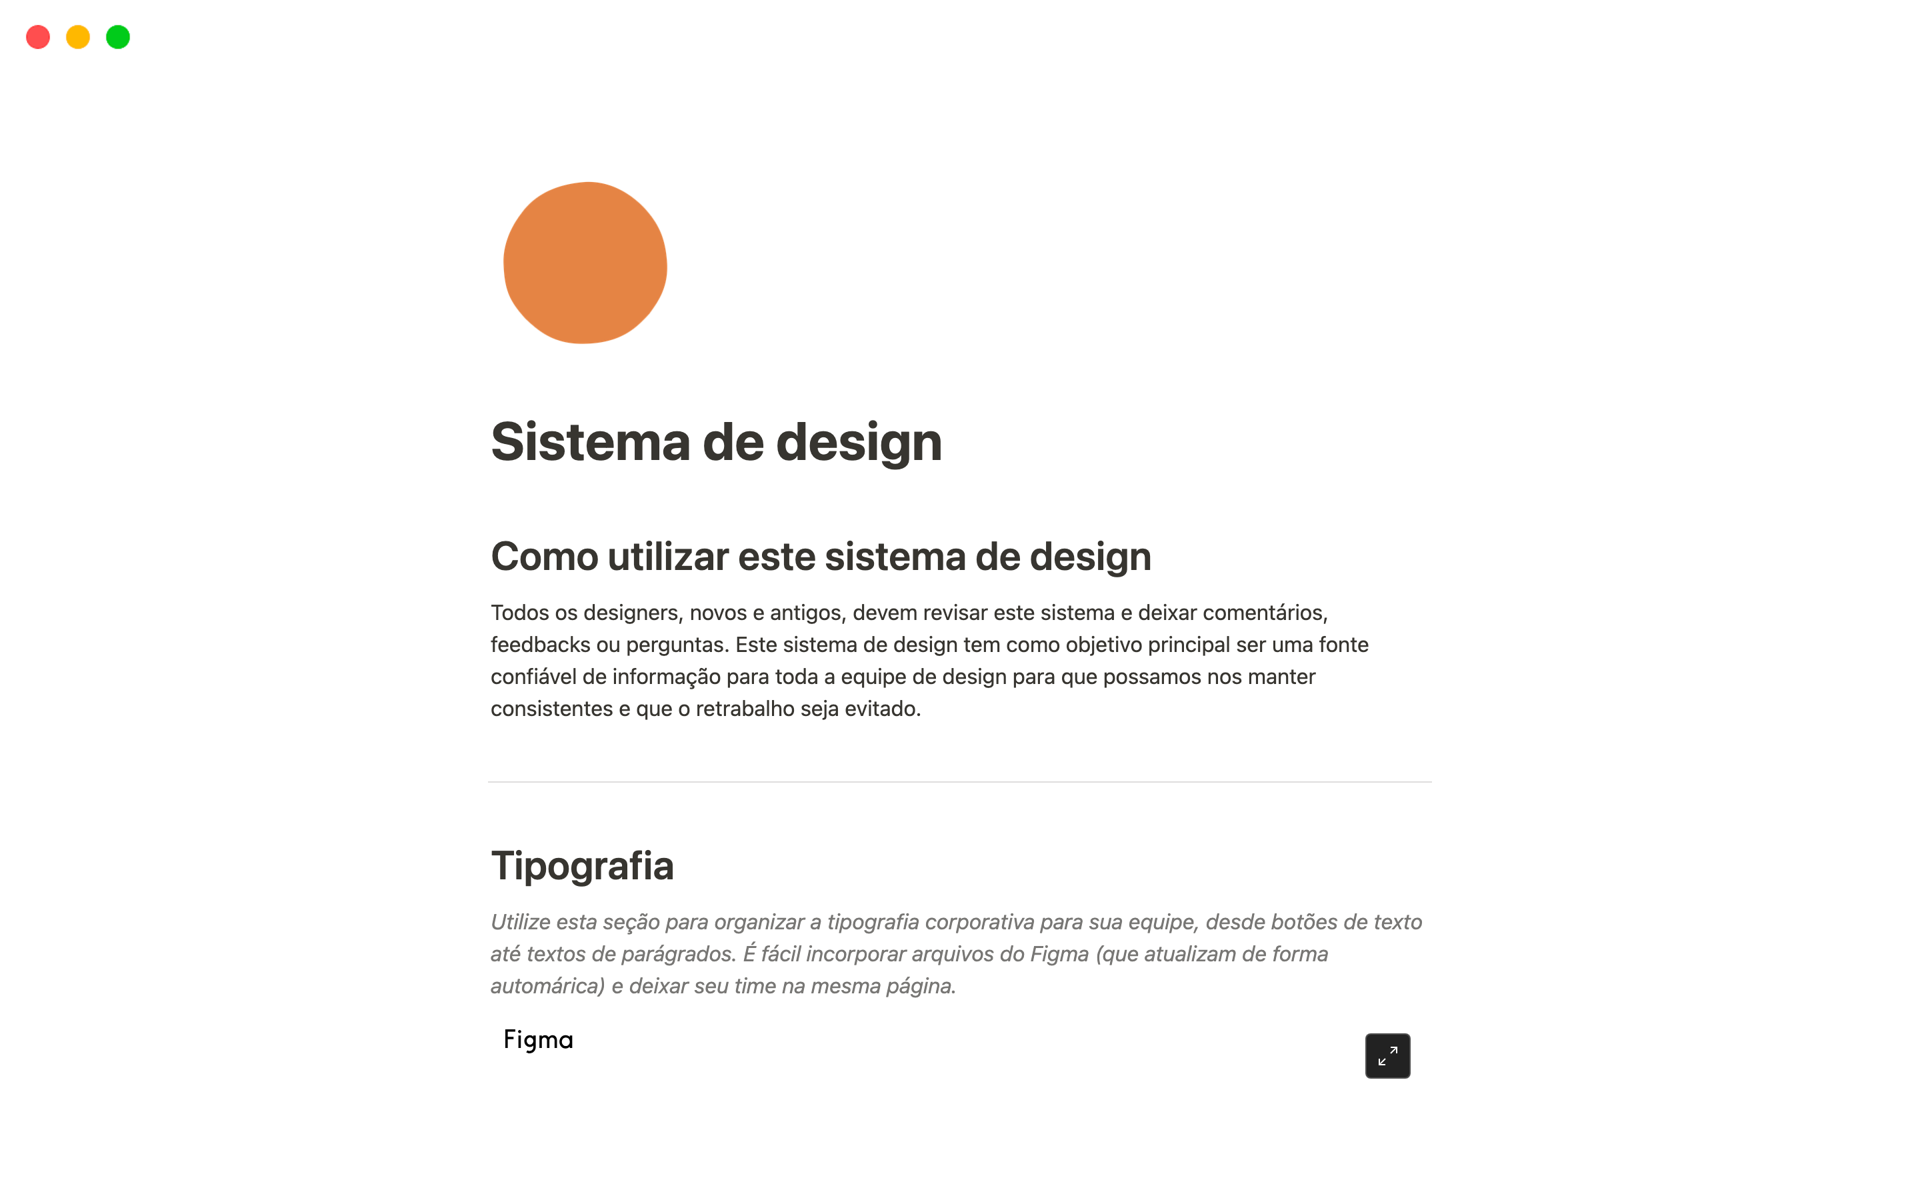 A design system is a hub for style guides and reusable elements which teams can reference throughout the design process.